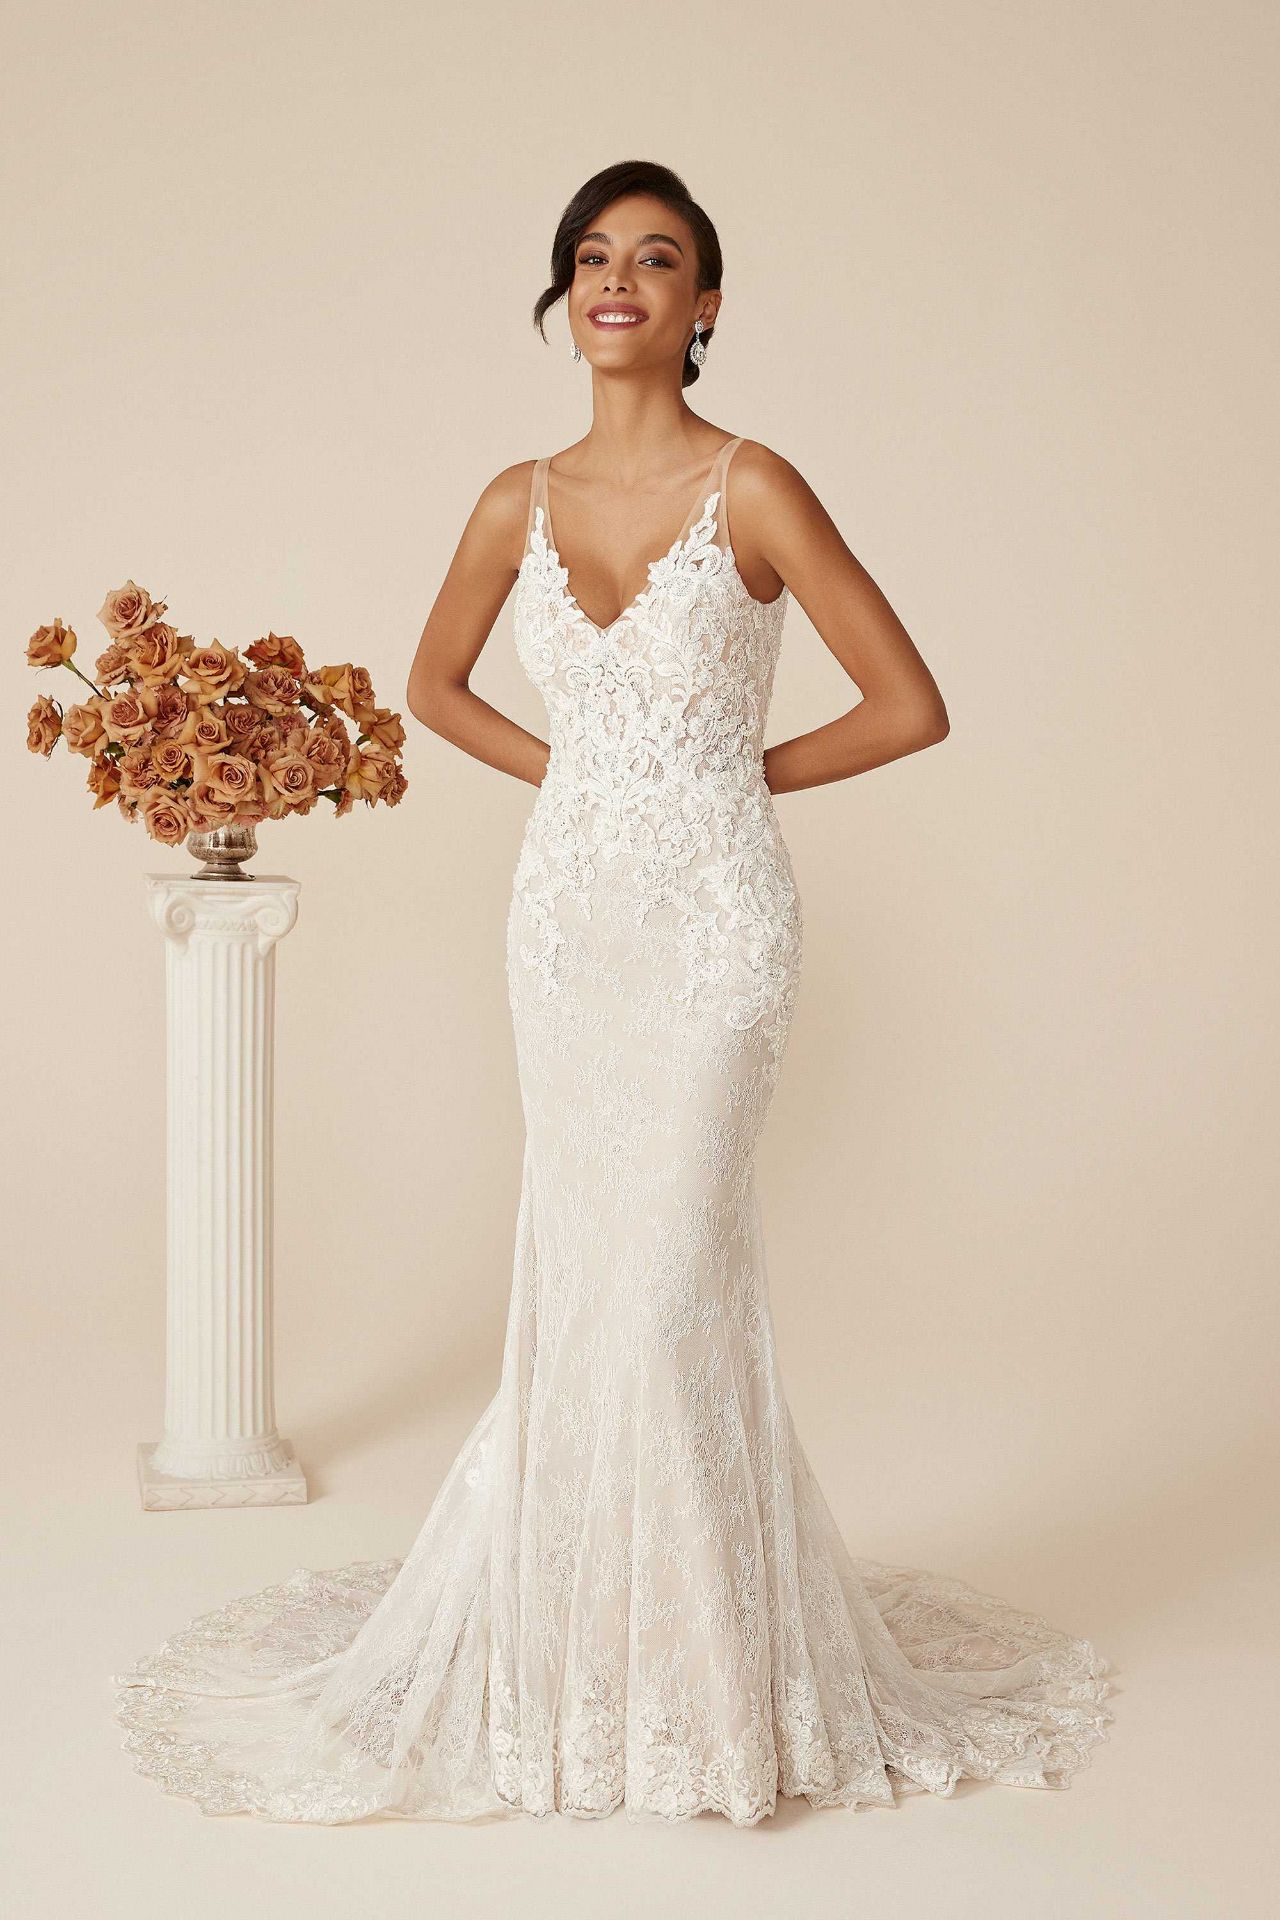 1 x Justin Alexander Allover Lace Deep V-Neck Fit and Flare Wedding Dress - UK Size 10 - RRP £1,725 - Image 5 of 11